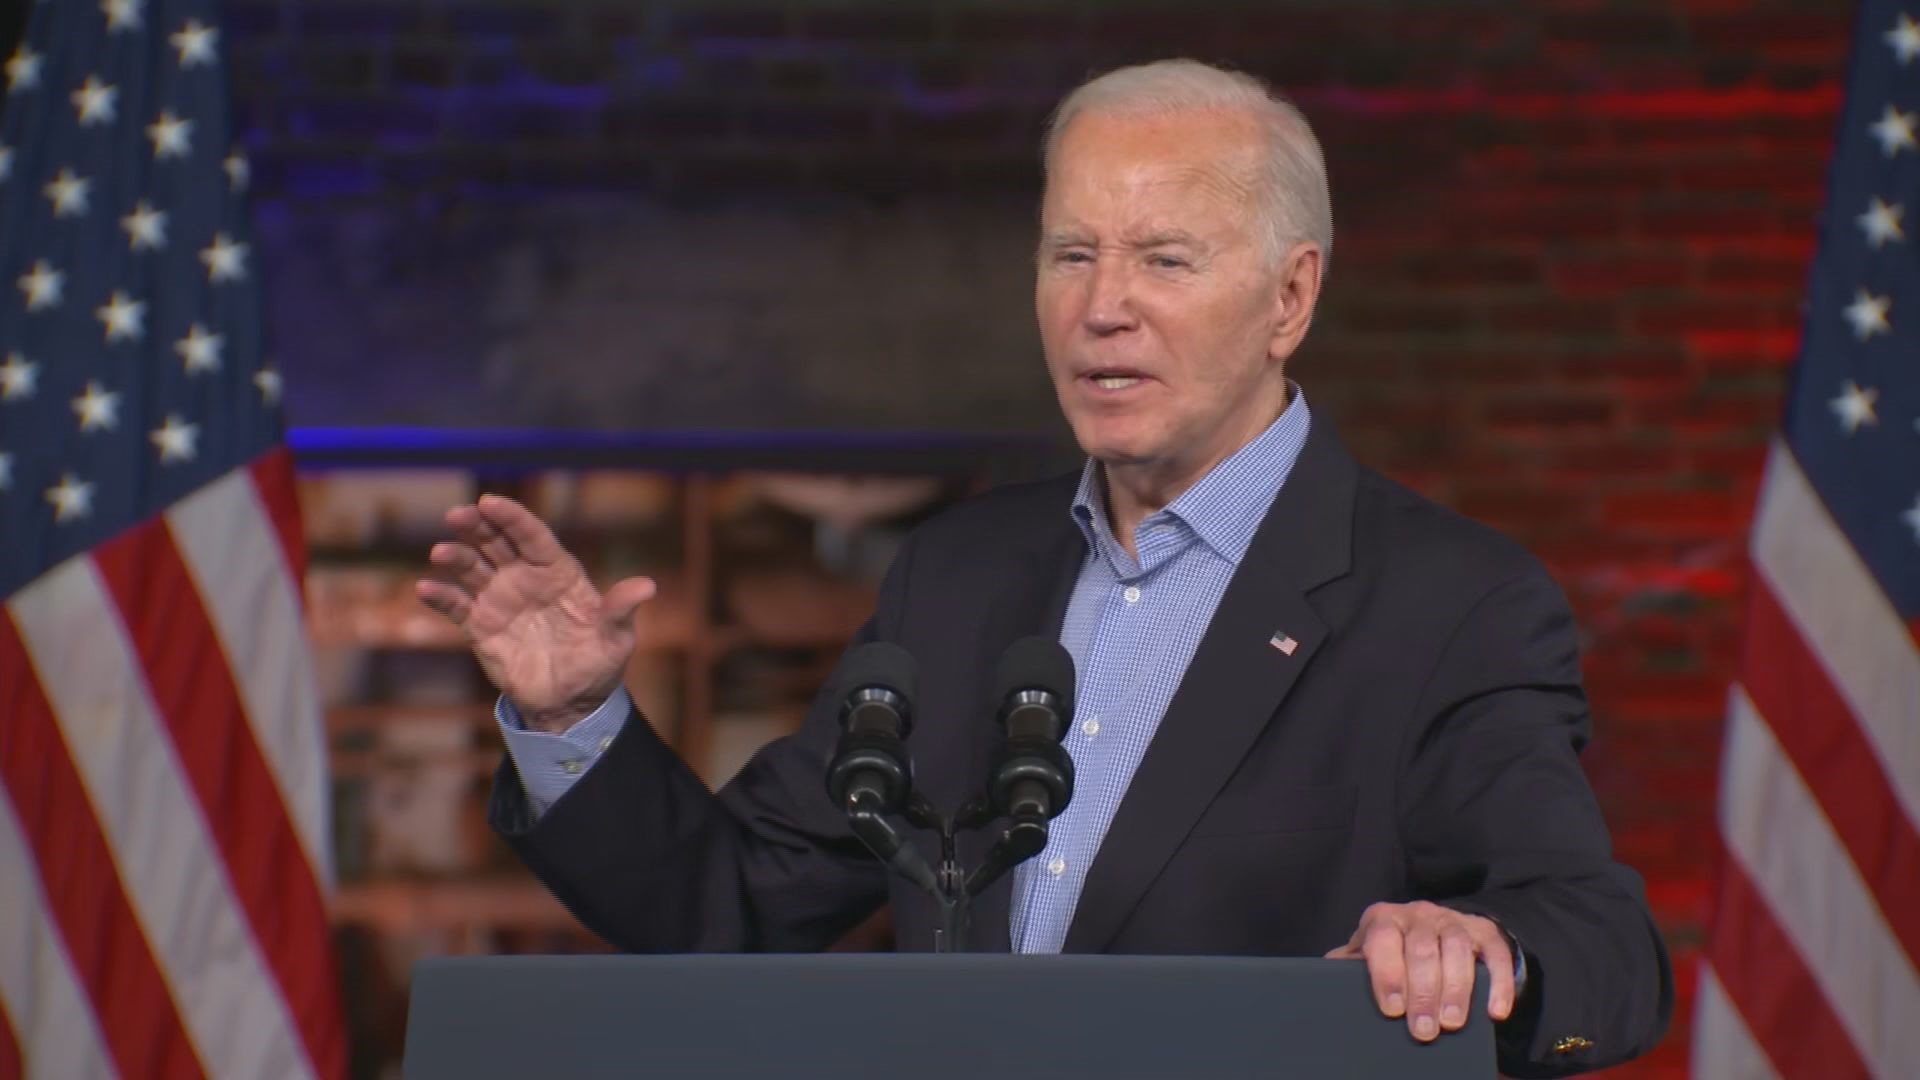 Biden talked about several issues and endorsed his reelection for the presidency.